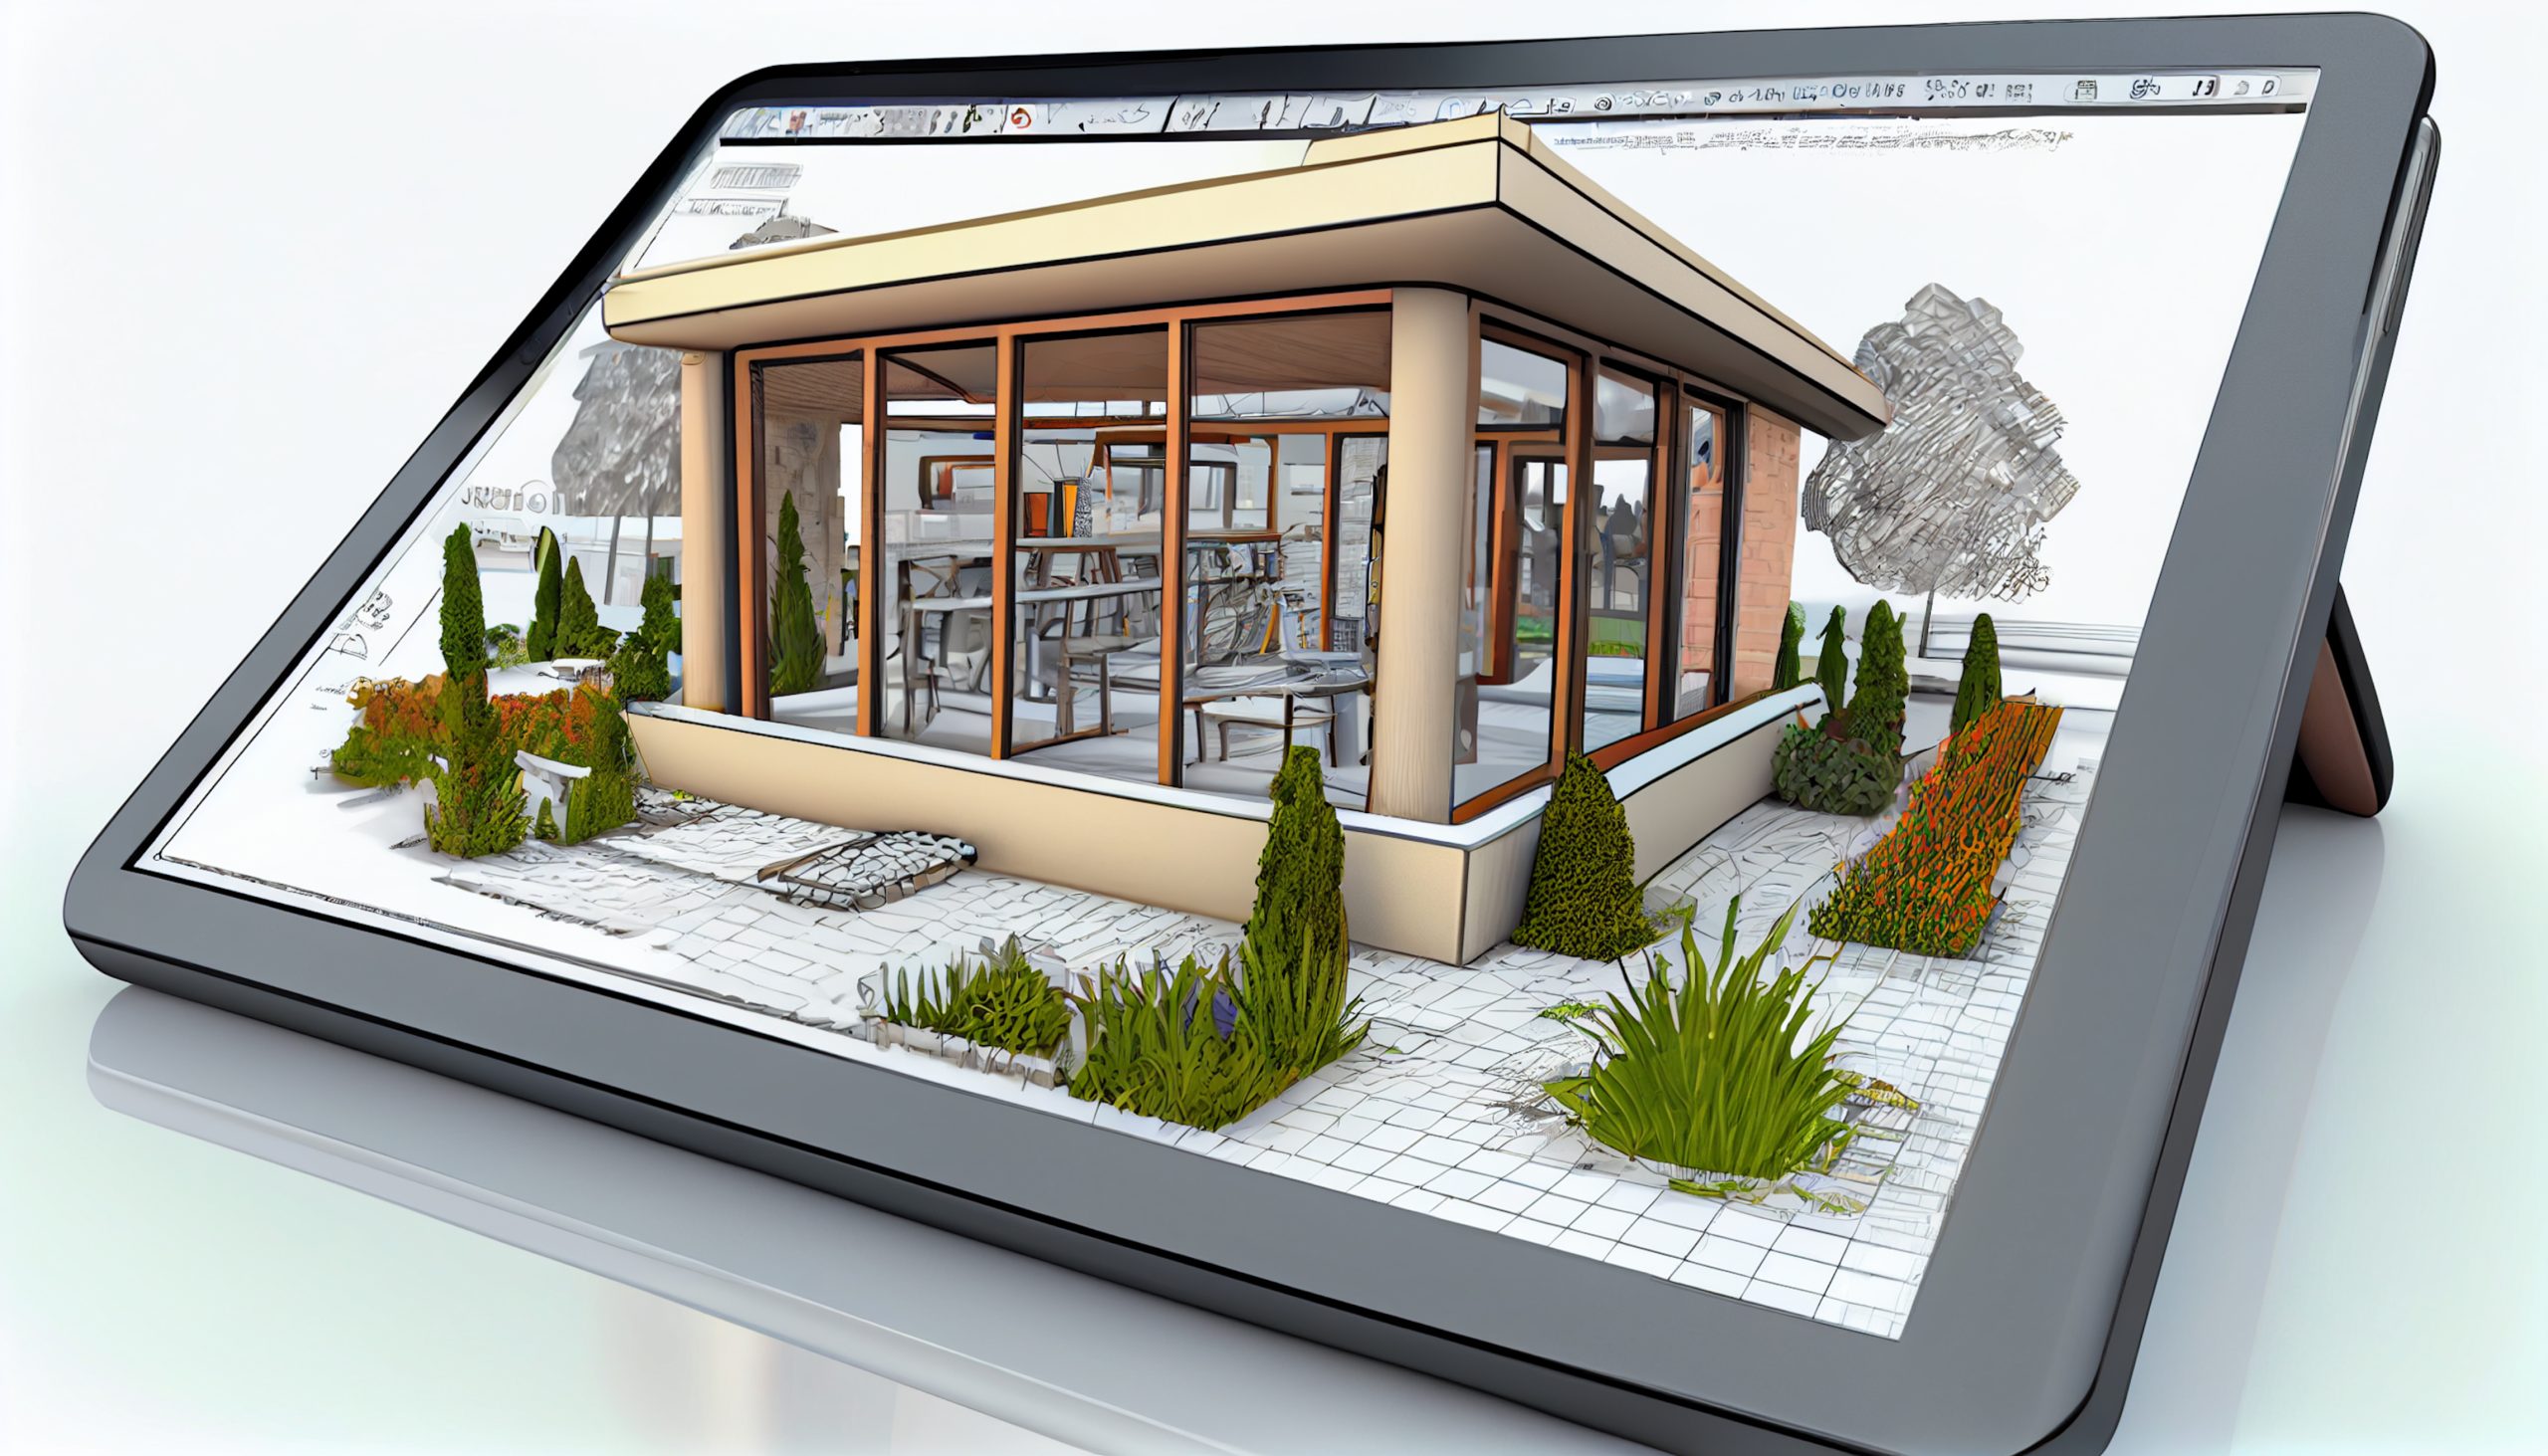 Can Landscaping Manufacturers Benefit From Augmented Reality?